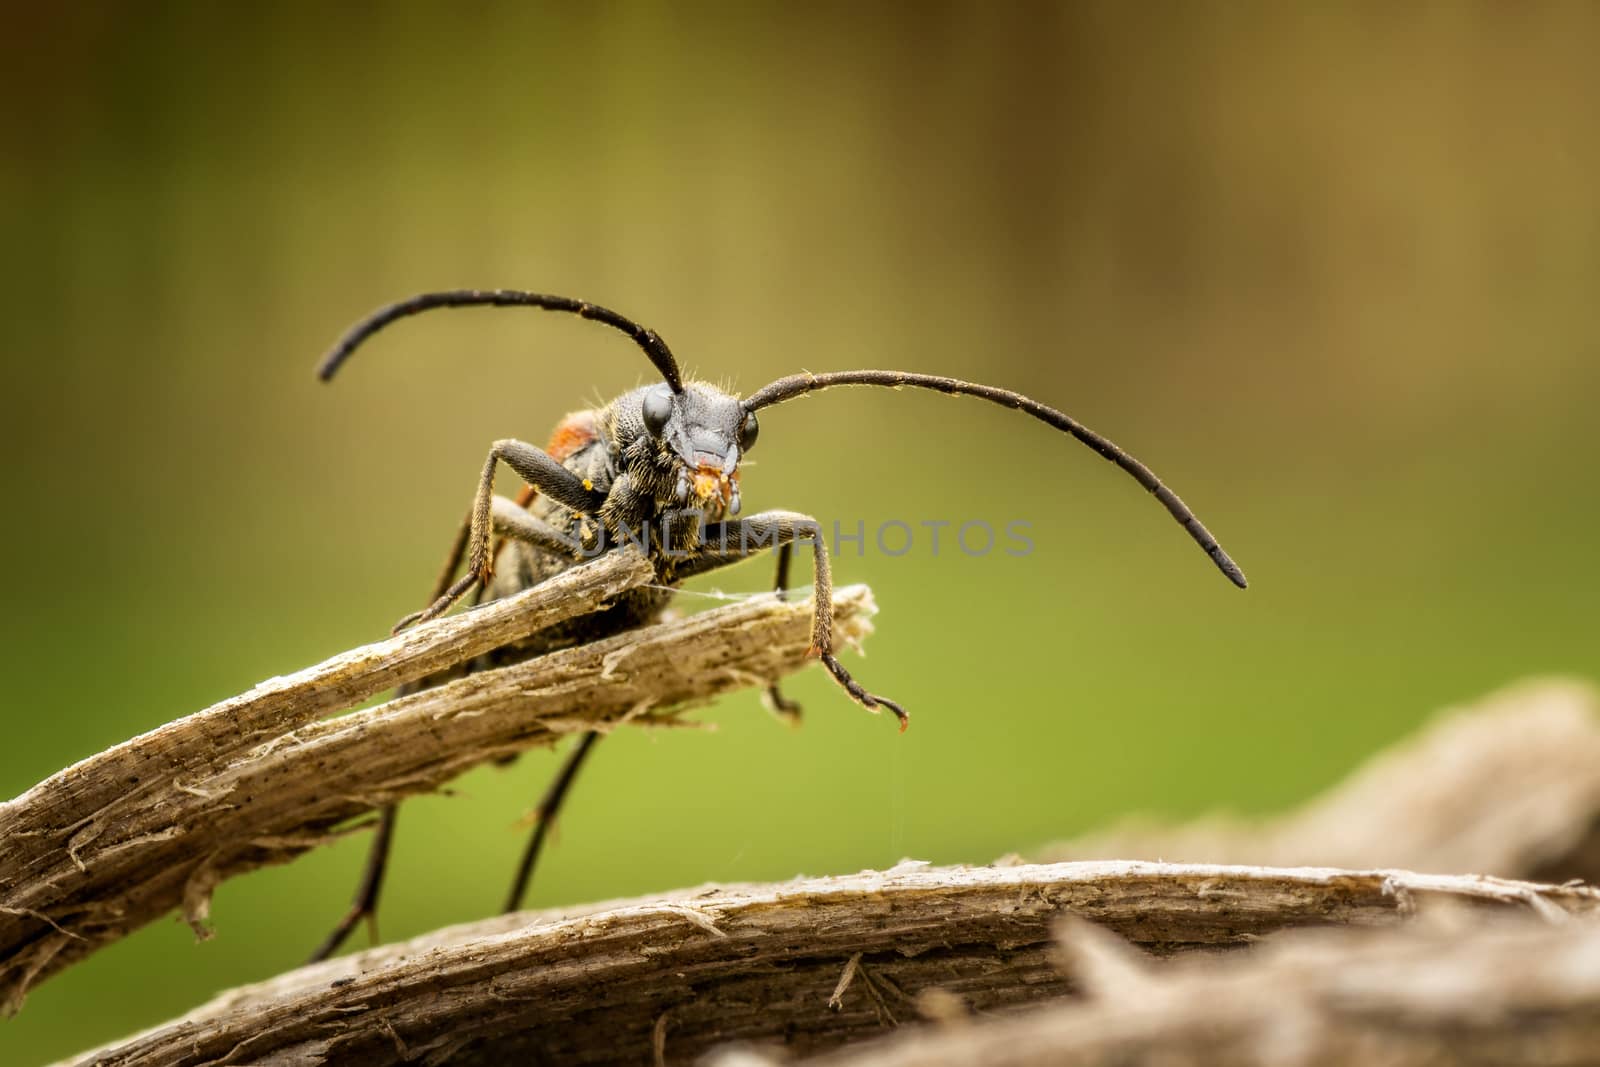 Beetle on a piece of wood. Macro shot with blurred background.